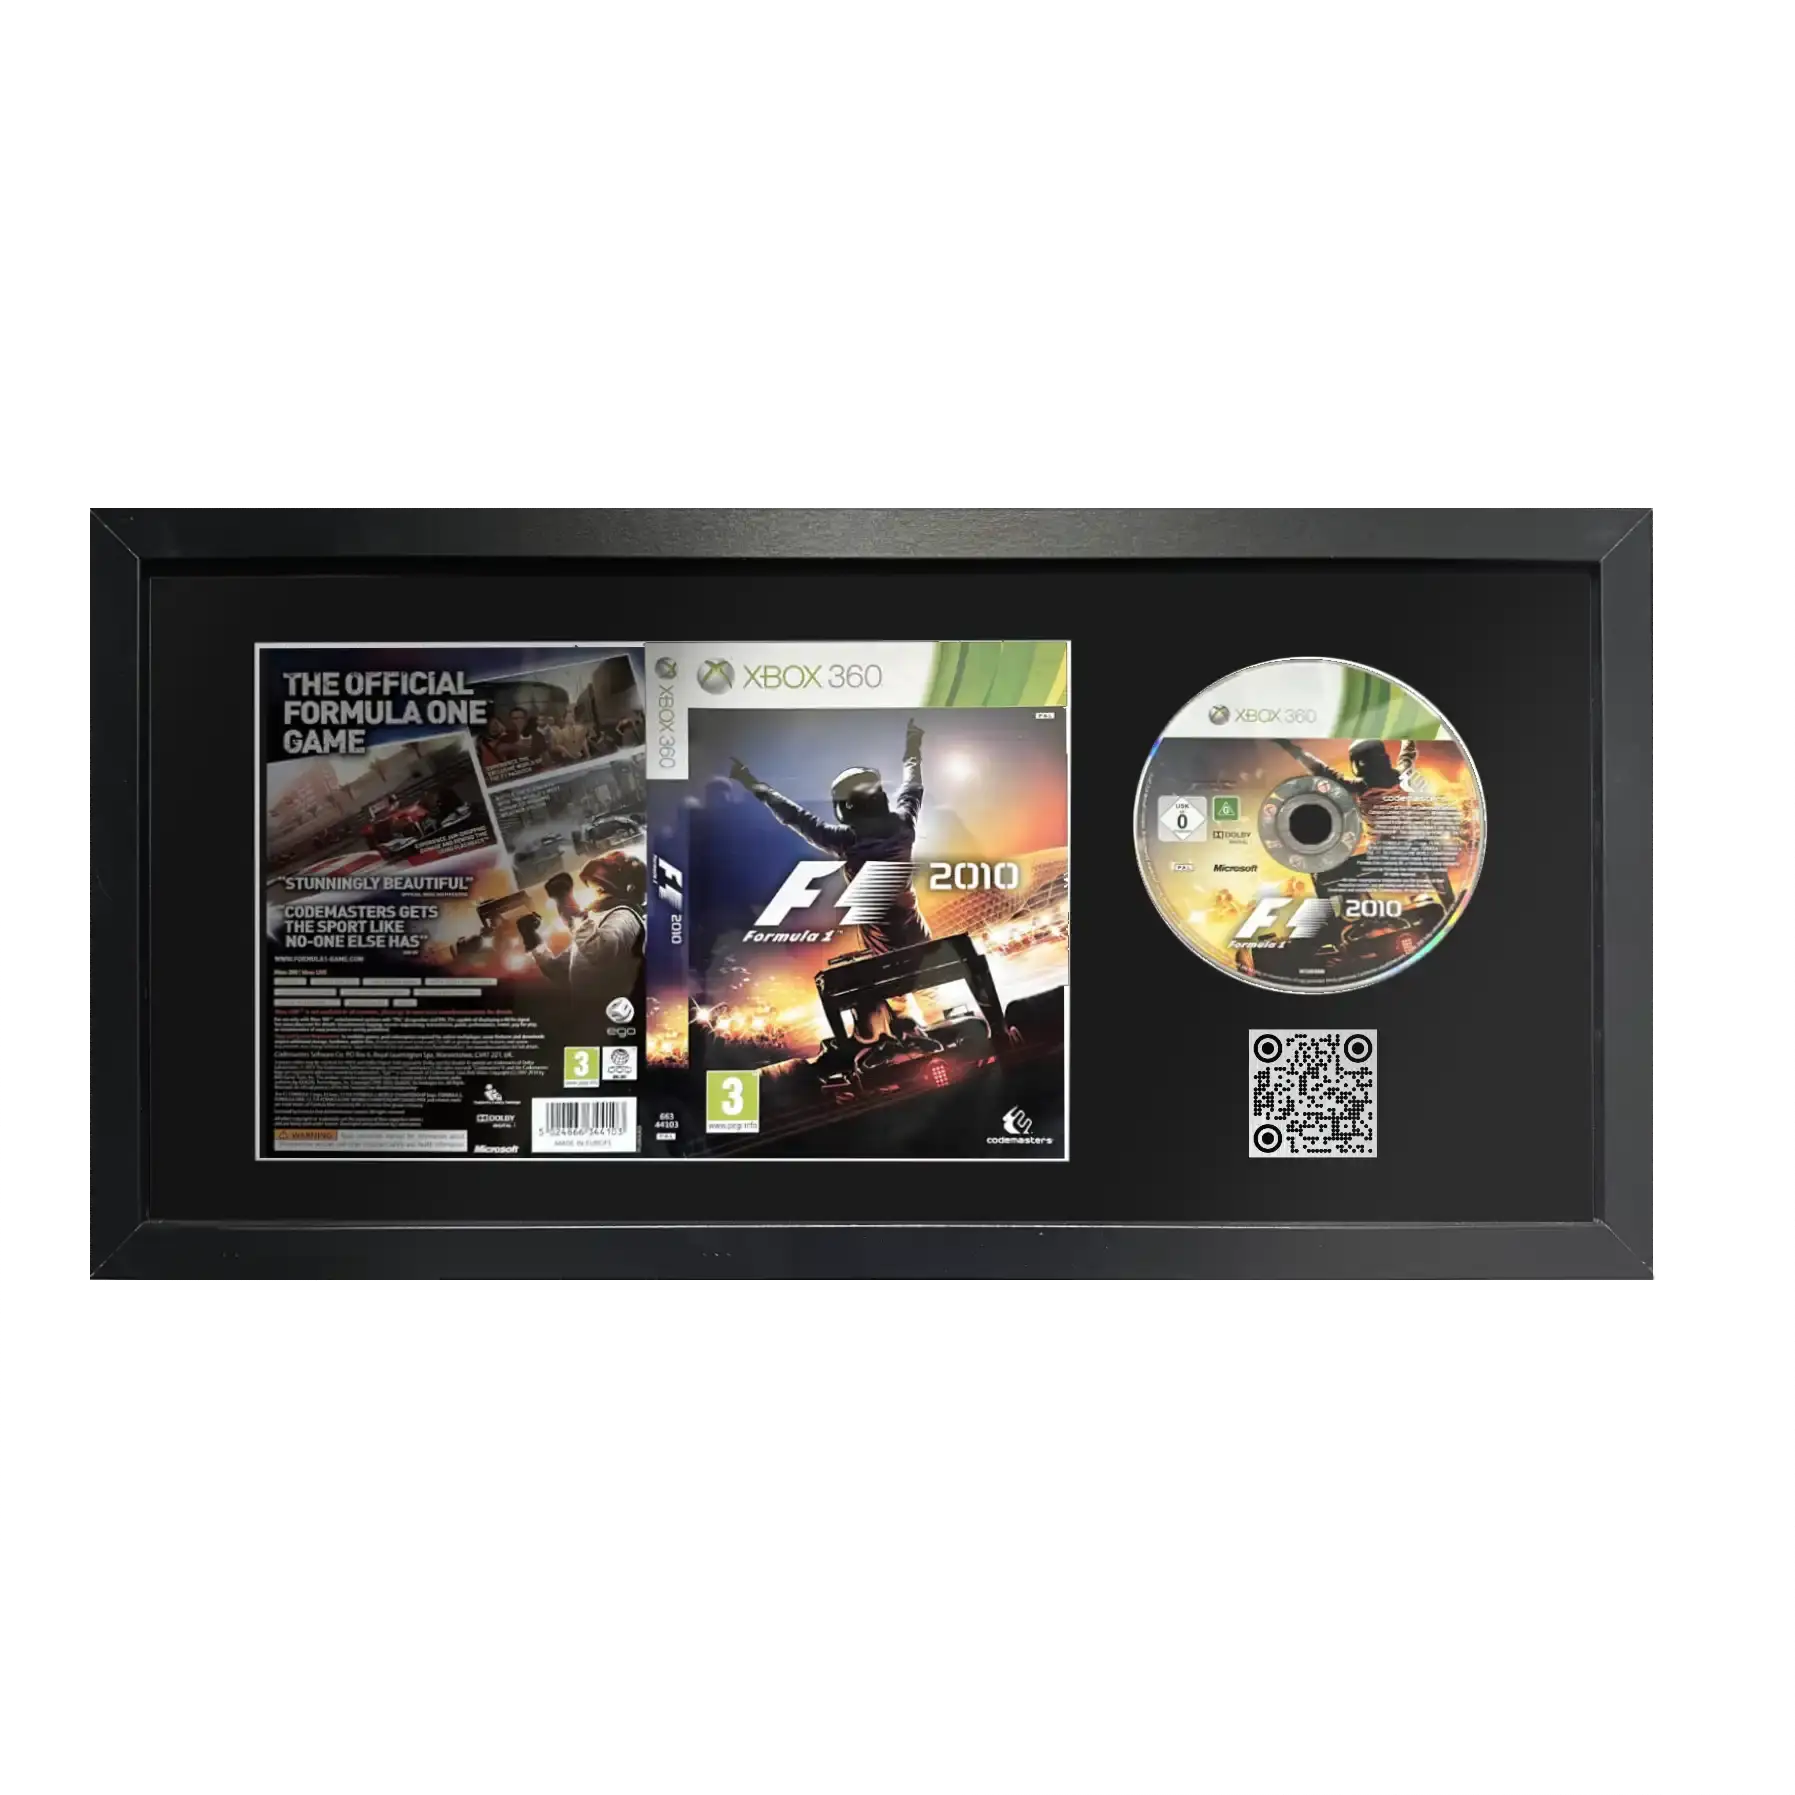 F1 2010 game on Xbox 360 in a frame with a QR code